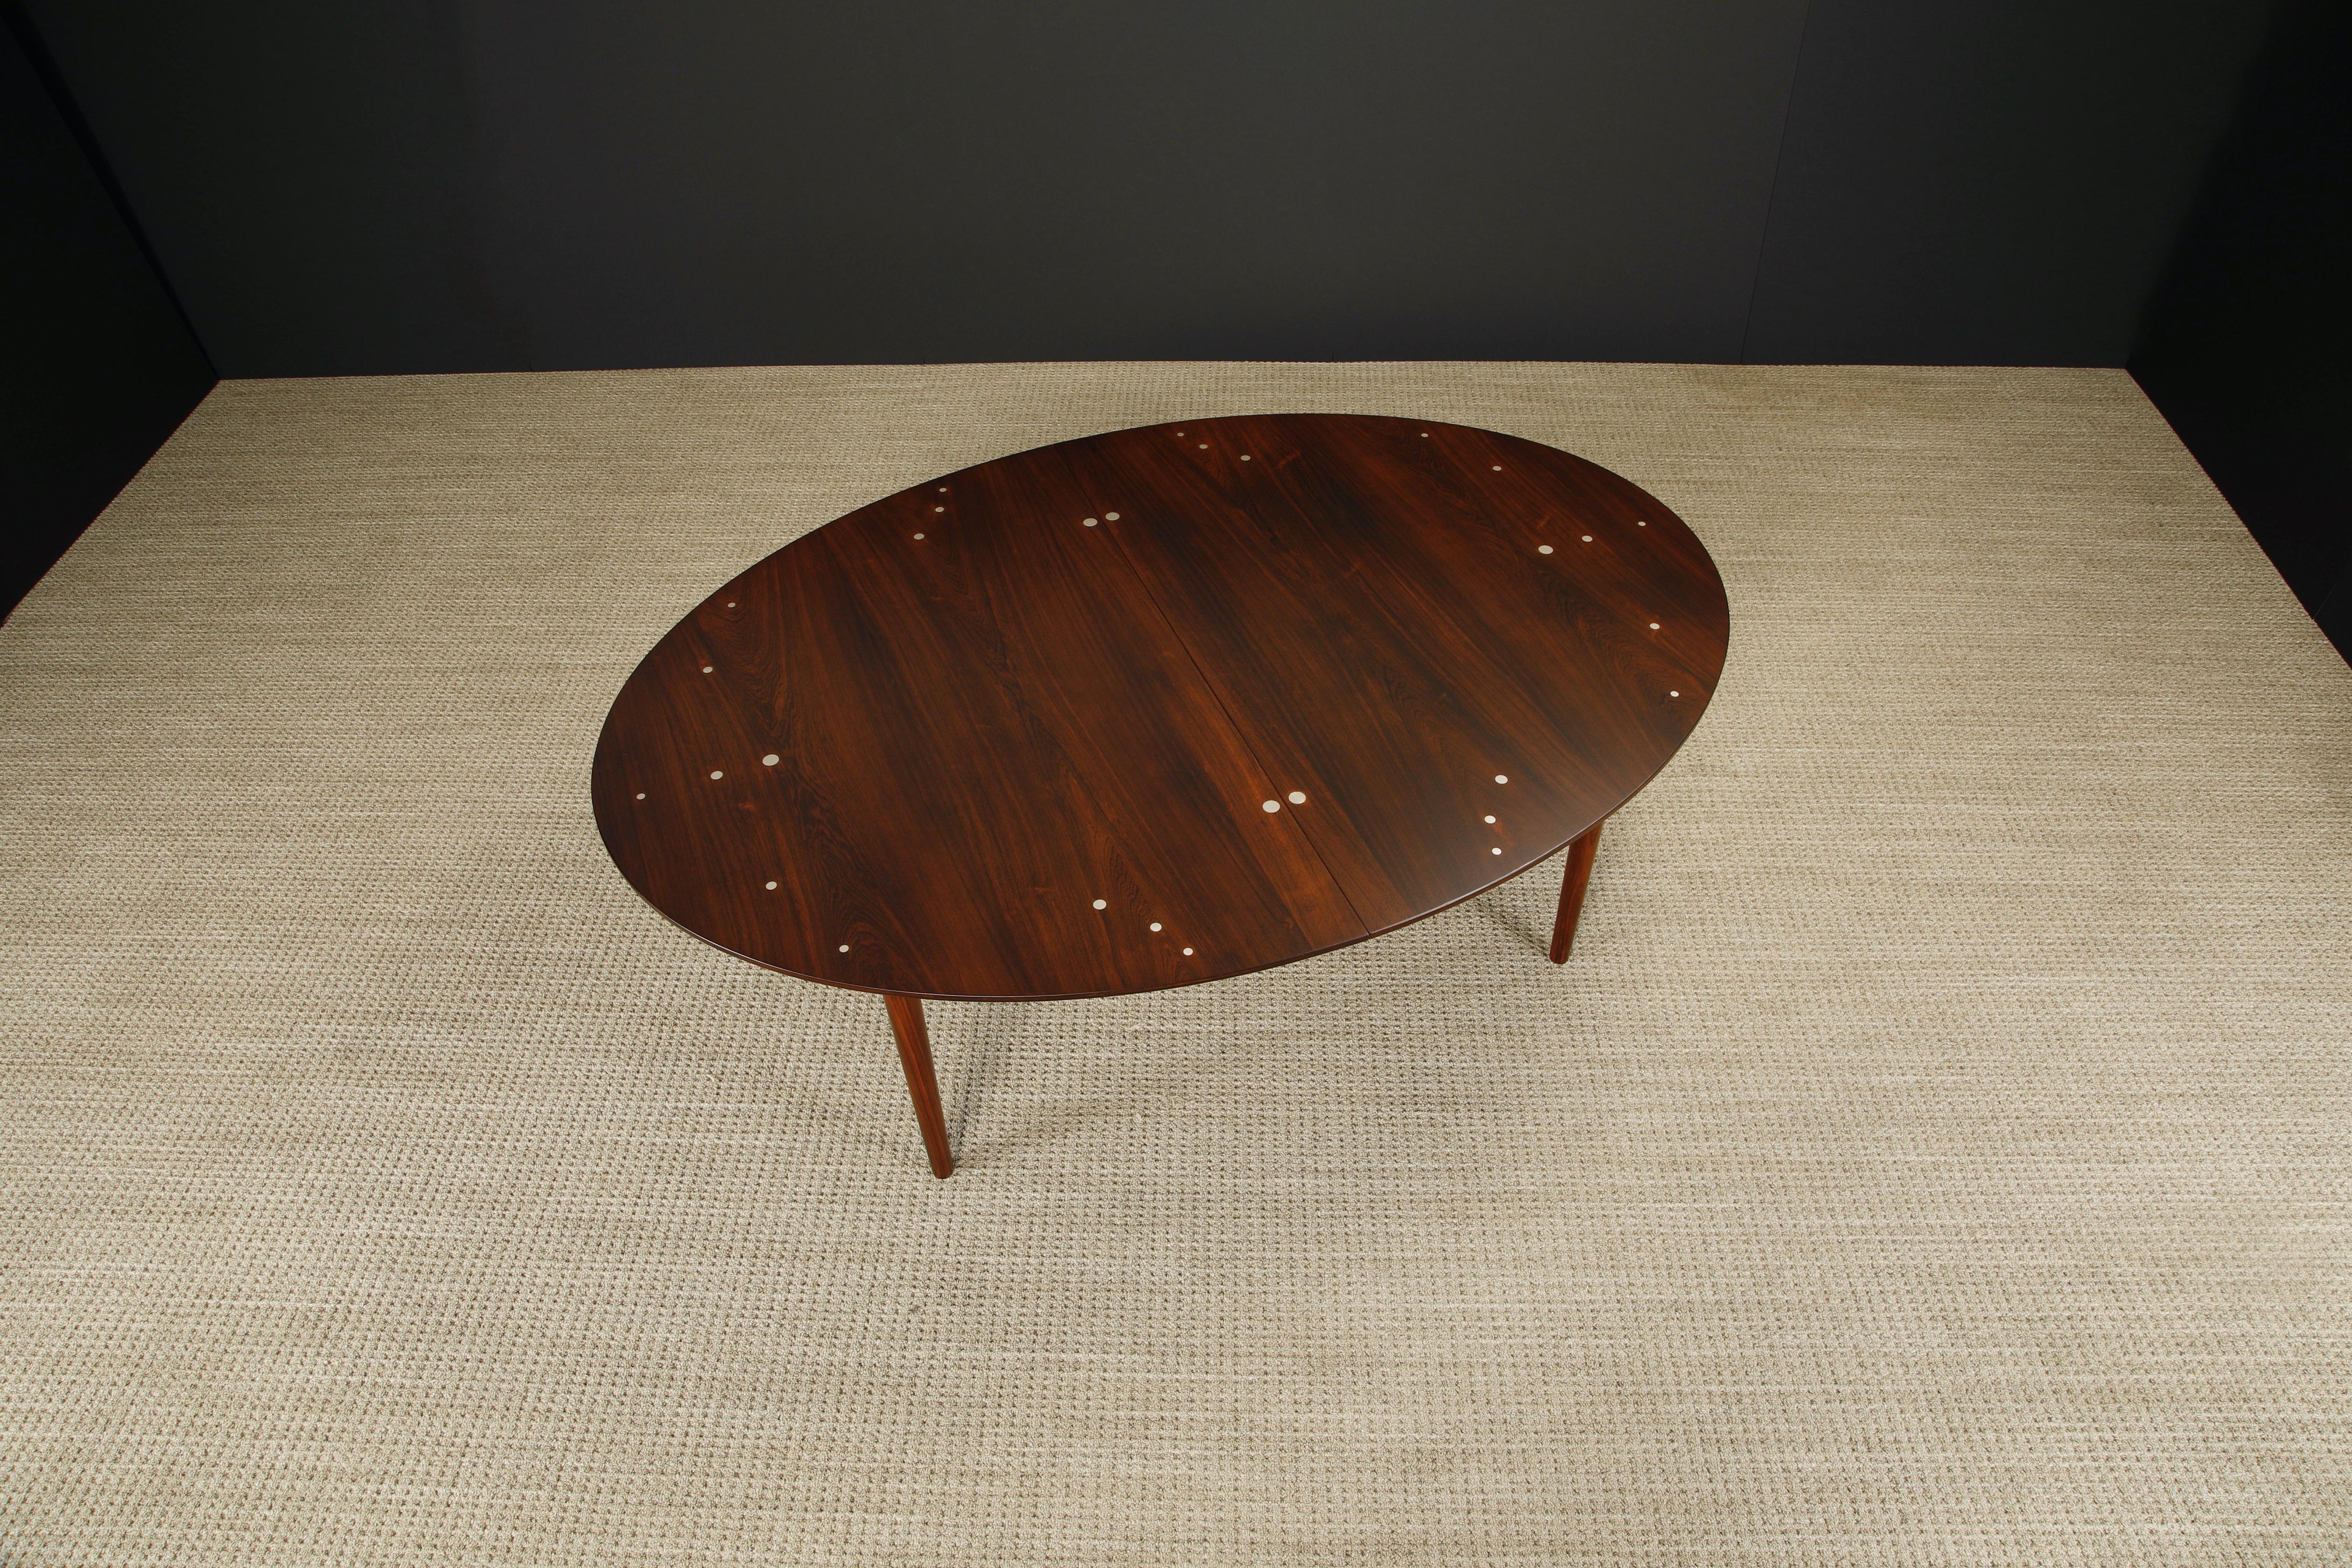 Finn Juhl 'Judas' Rosewood and Sterling Silver Dining Table, c 1950s, Signed For Sale 4